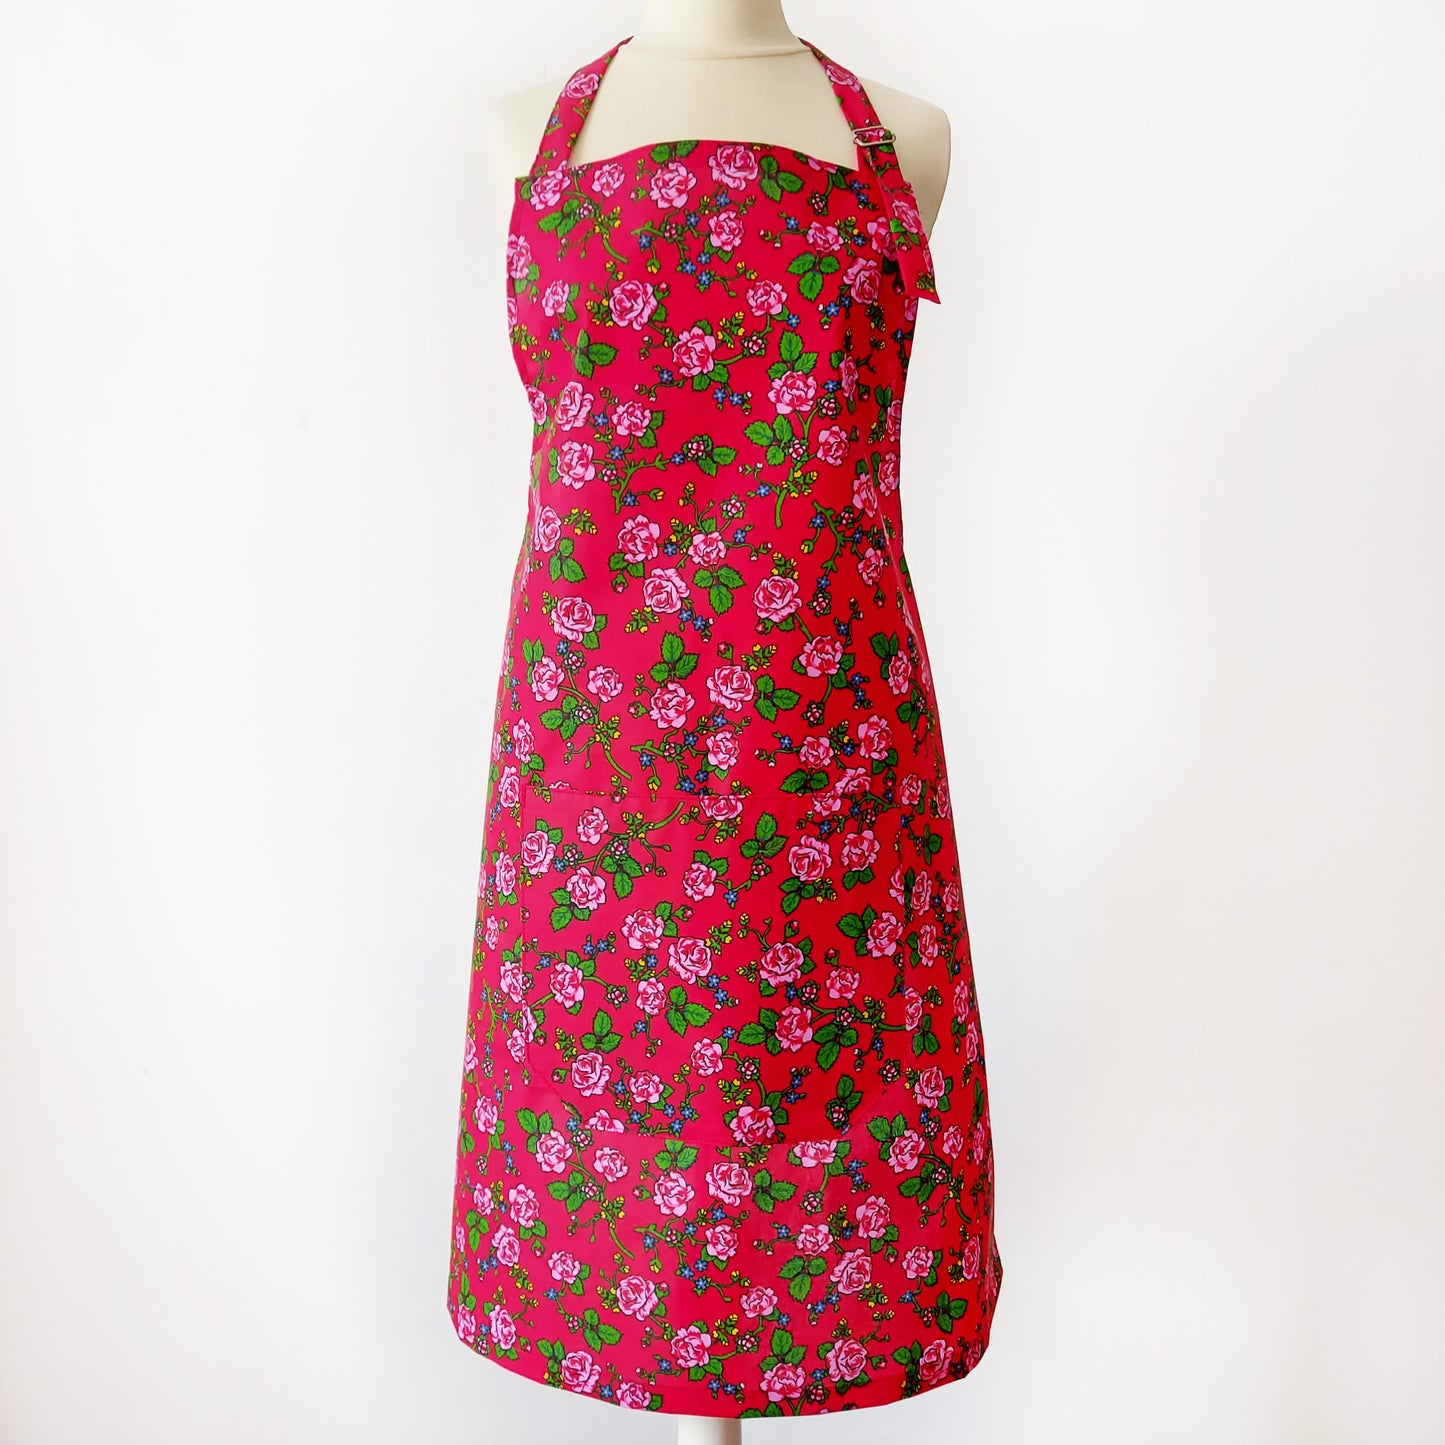 Cotton aprons, red aprons, buy kitchen aprons, aprons in flowers, aprons bulk, 100% cotton apron, apron with pocket, women's aprons, aprons for cooking, Linencharm